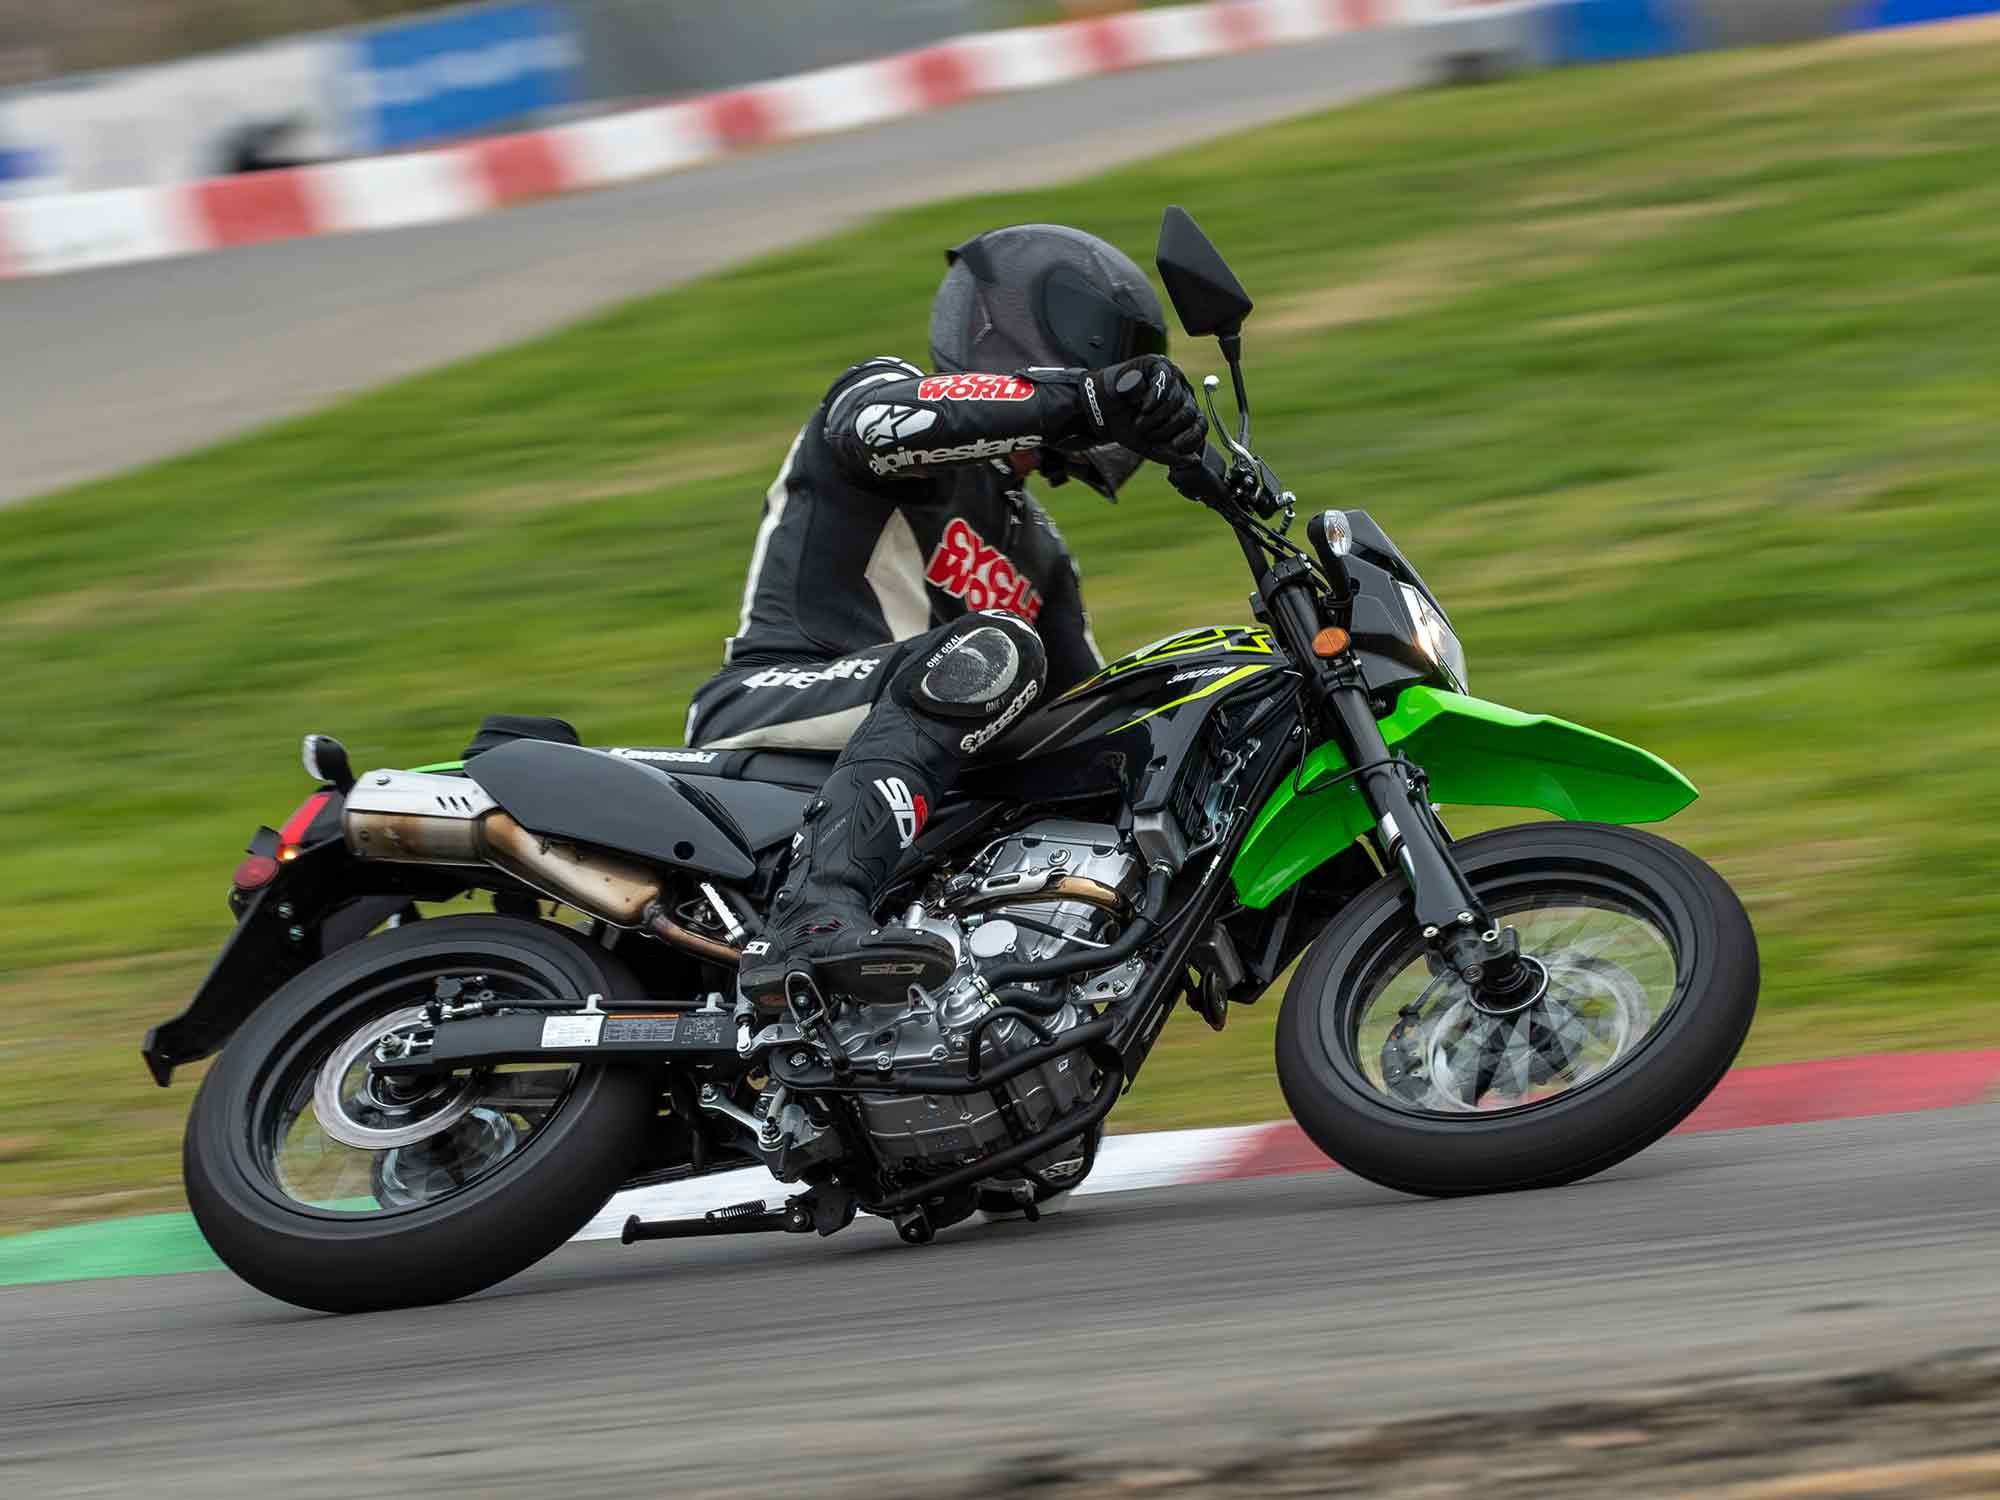 The KLX300SM was a blast on the karting track with fade-free braking and impressive grip from the IRC Road Winner tires.